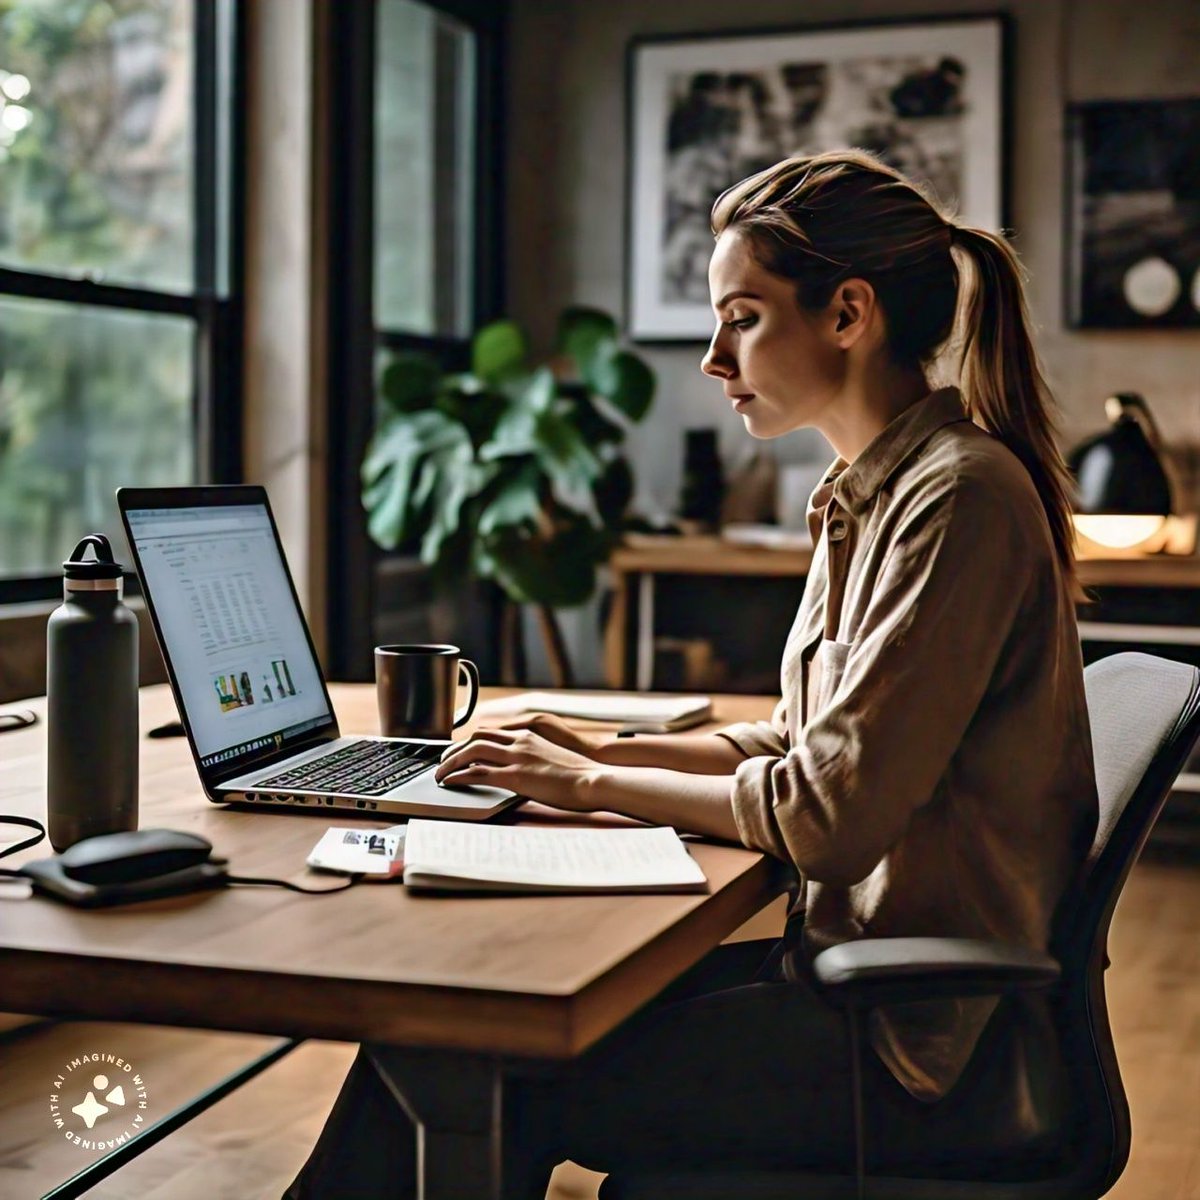 TIPS ON EFFECTIVE REMOTE WORKING

A good remote work routine typically includes a combination of the following elements:

1. *Dedicated workspace*: Designate a quiet, comfortable, and clutter-free area for work.
2. *Regular working hours*: Establish a schedule and stick to it,